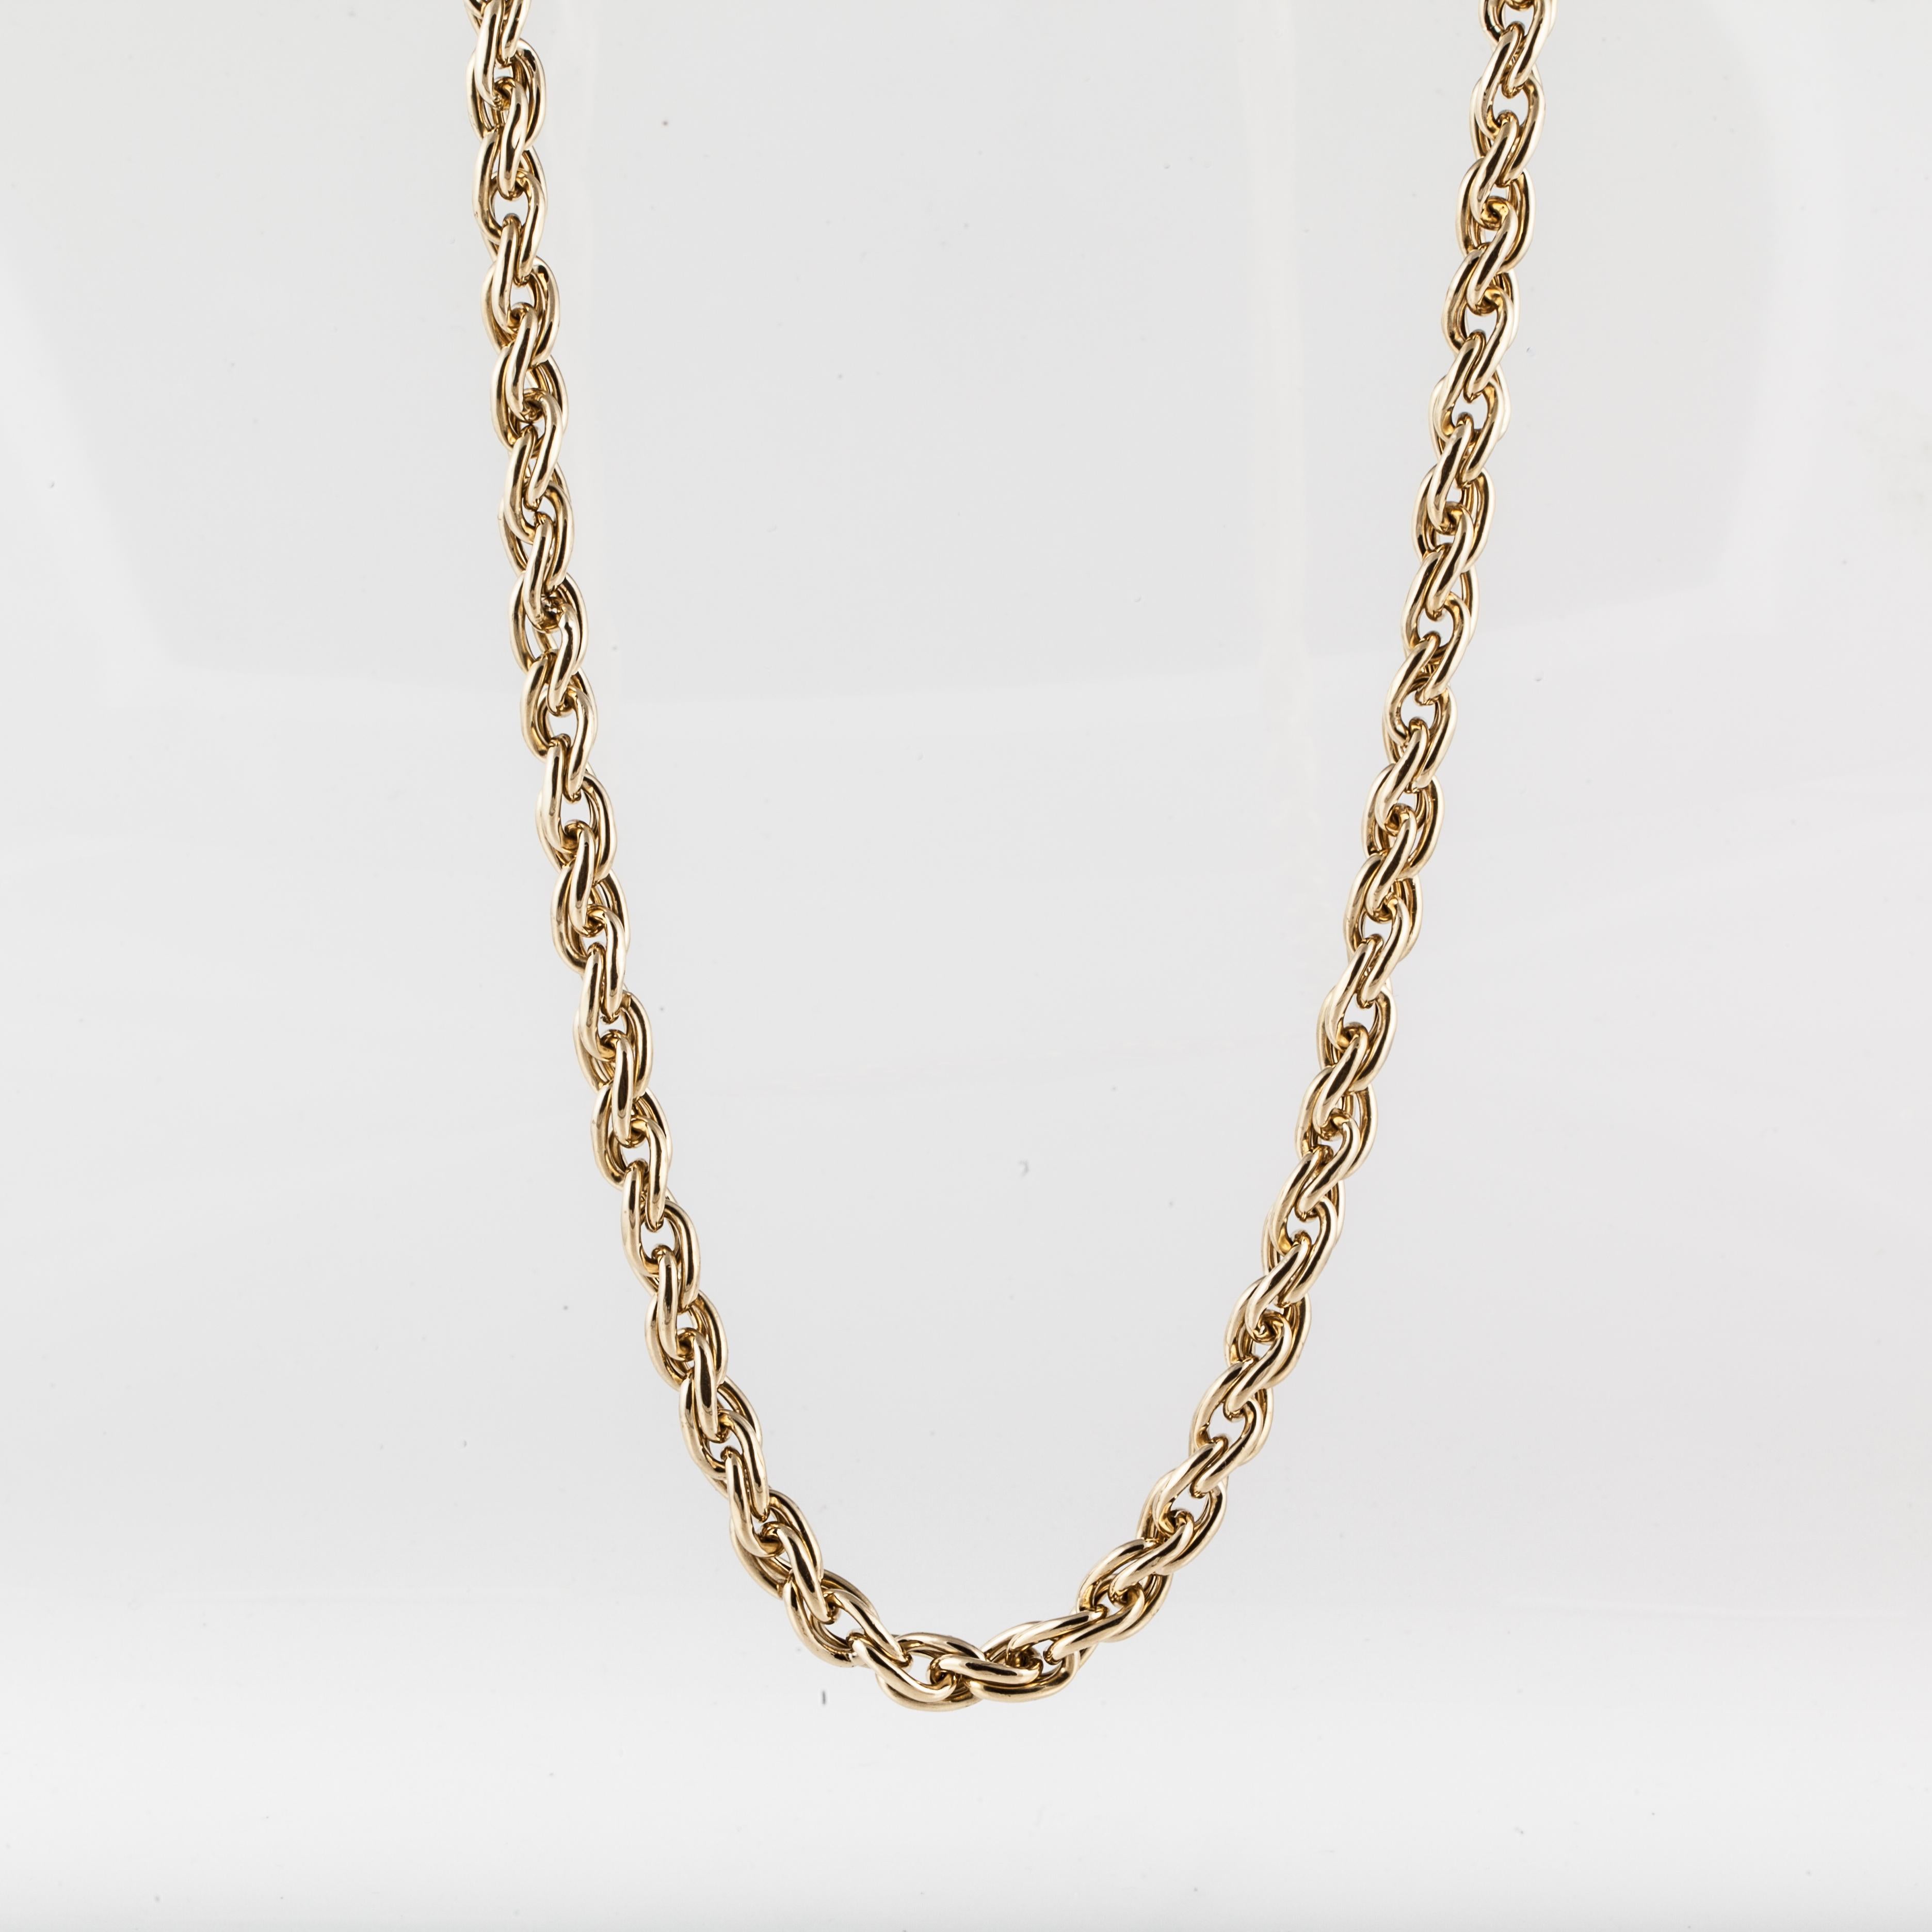 Chain necklace in 18K yellow gold with highly polished double link chain measuring 32 inches long and 5/16 inches wide. 